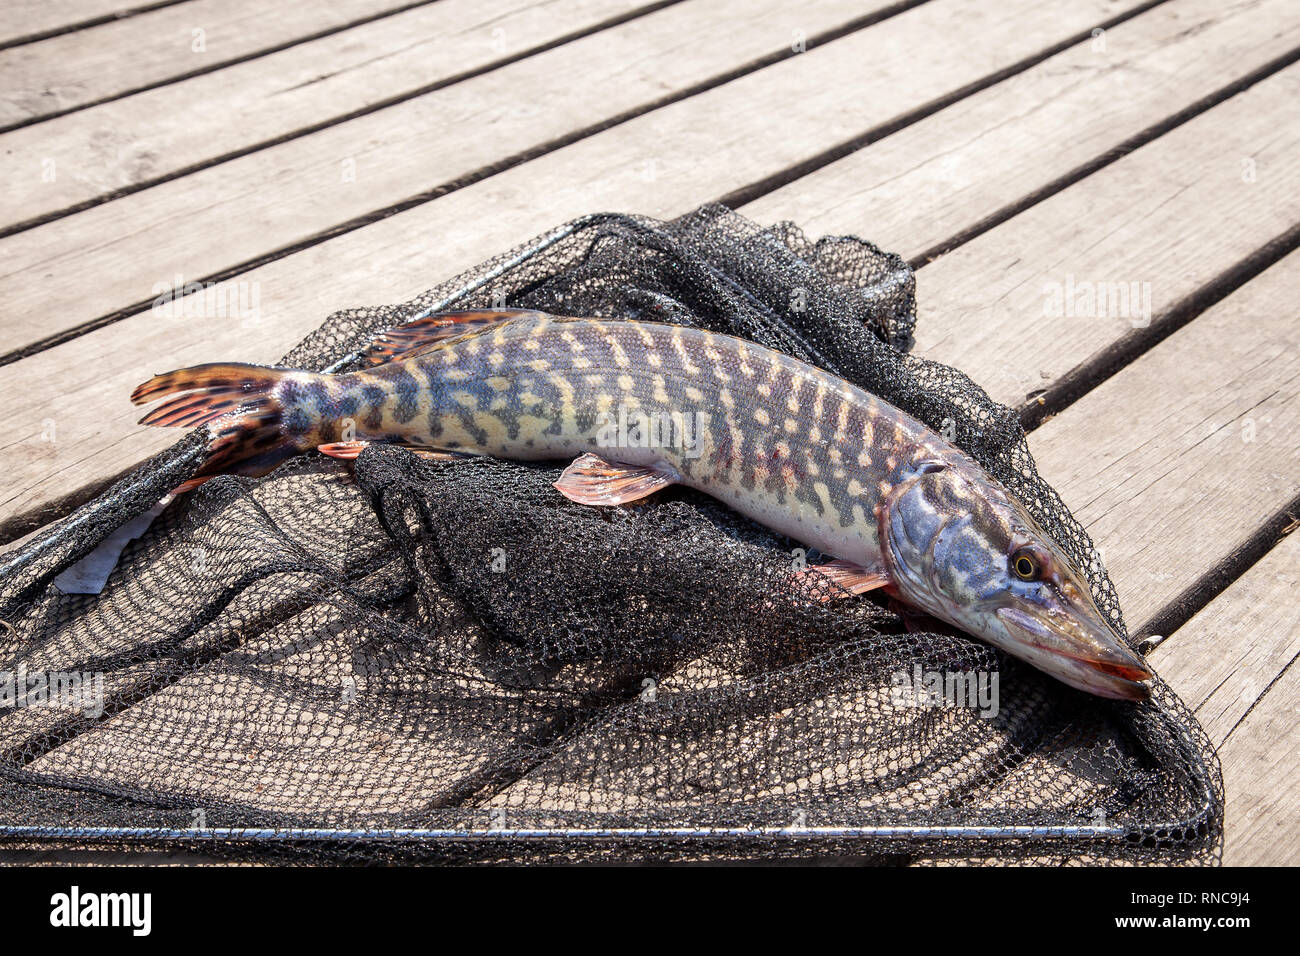 Freshwater Northern pike fish know as Esox Lucius lying on black fishing net.  Fishing concept, trophy catch - big freshwater pike fish just taken from  Stock Photo - Alamy